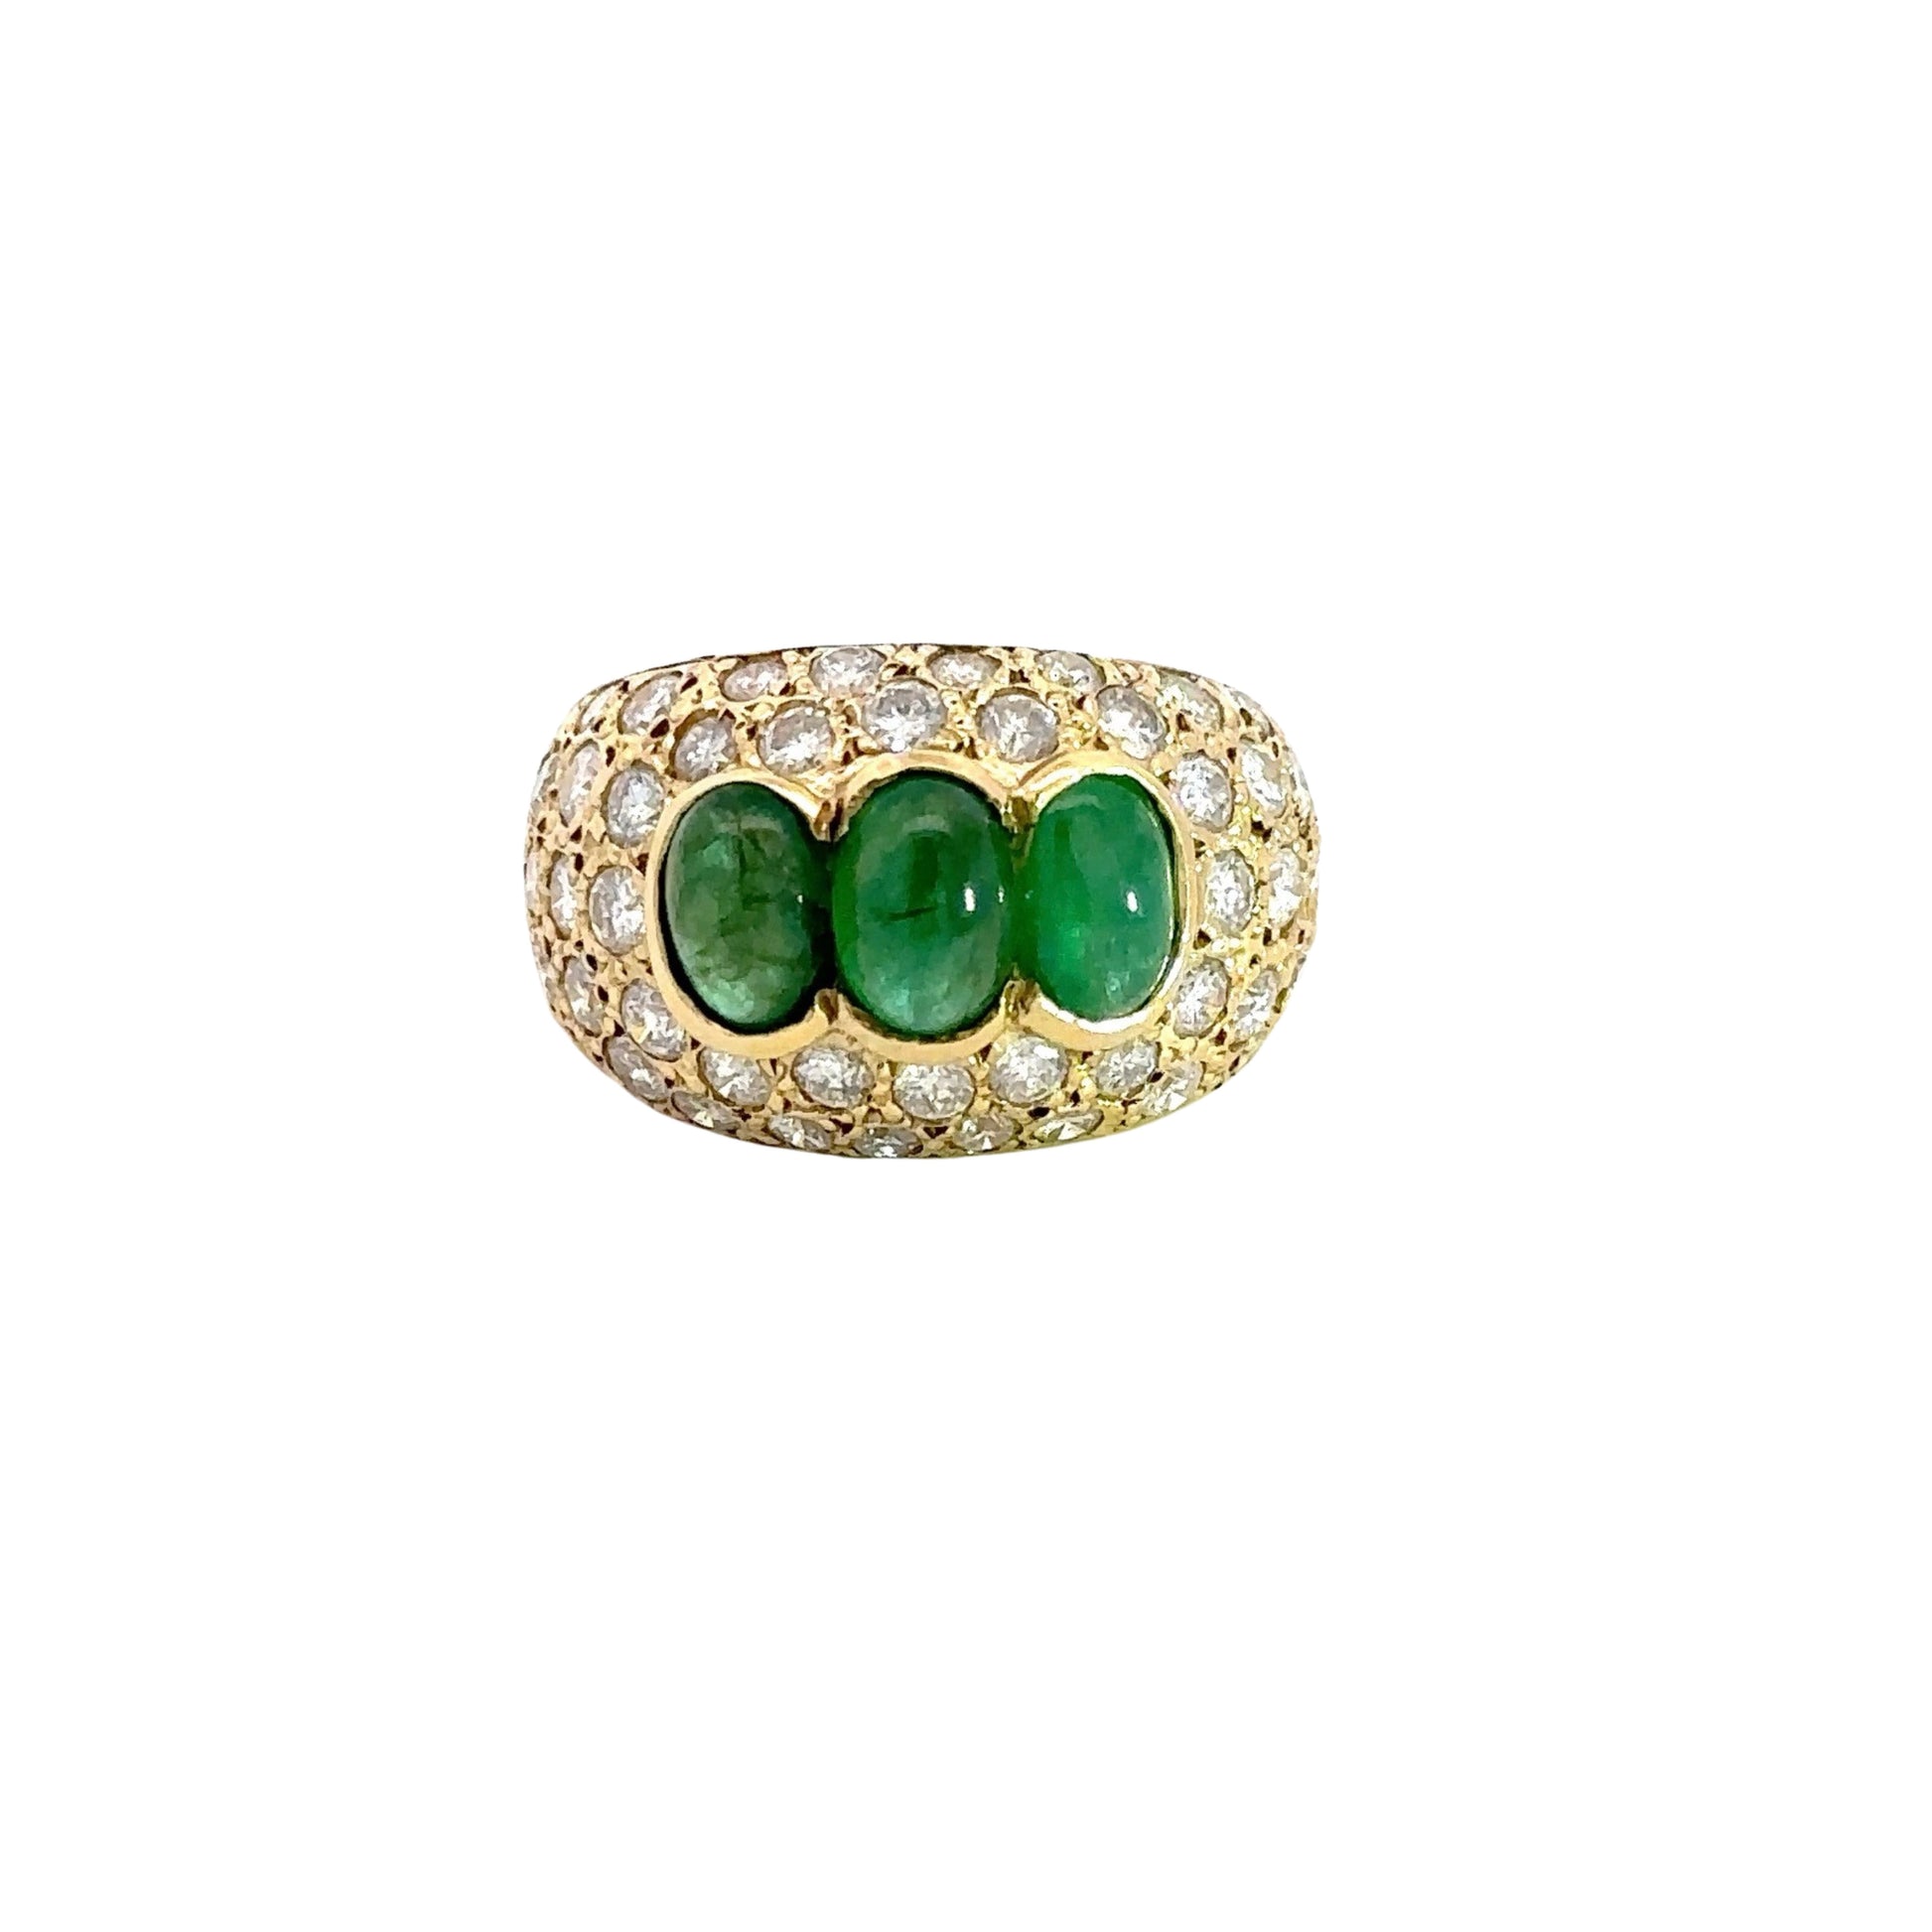 yellow gold ring with diamonds and 3 dome shaped emerald gemstones